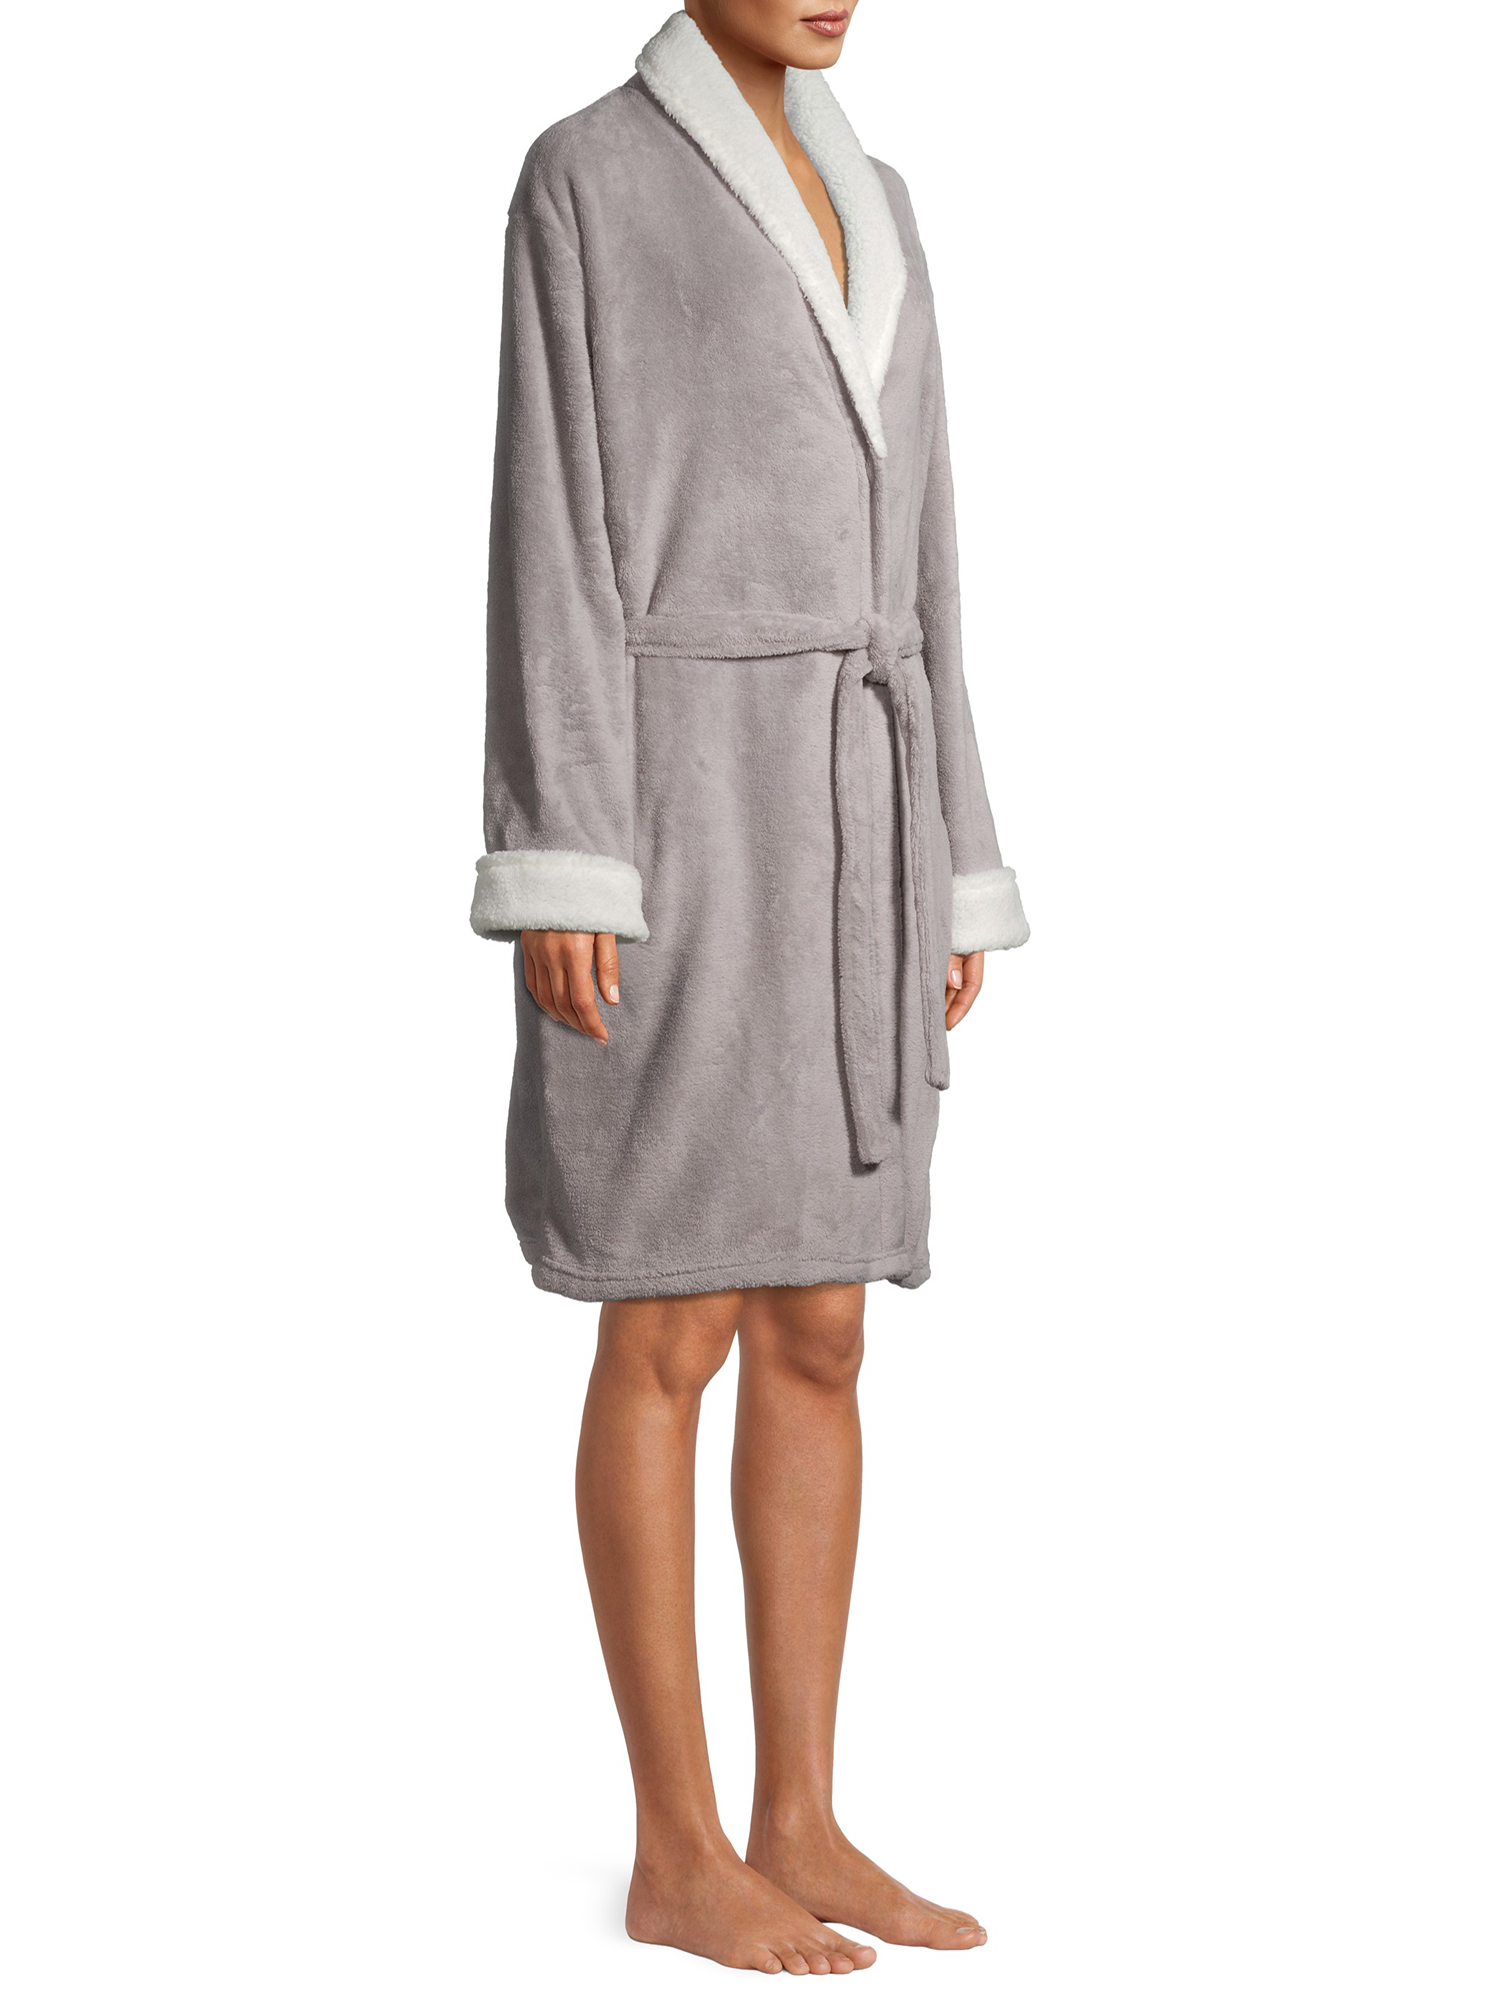 Blue Star Clothing Women's 3/4 Length Plush Robe with Sherpa Trim Collar & Cuffs - image 4 of 6